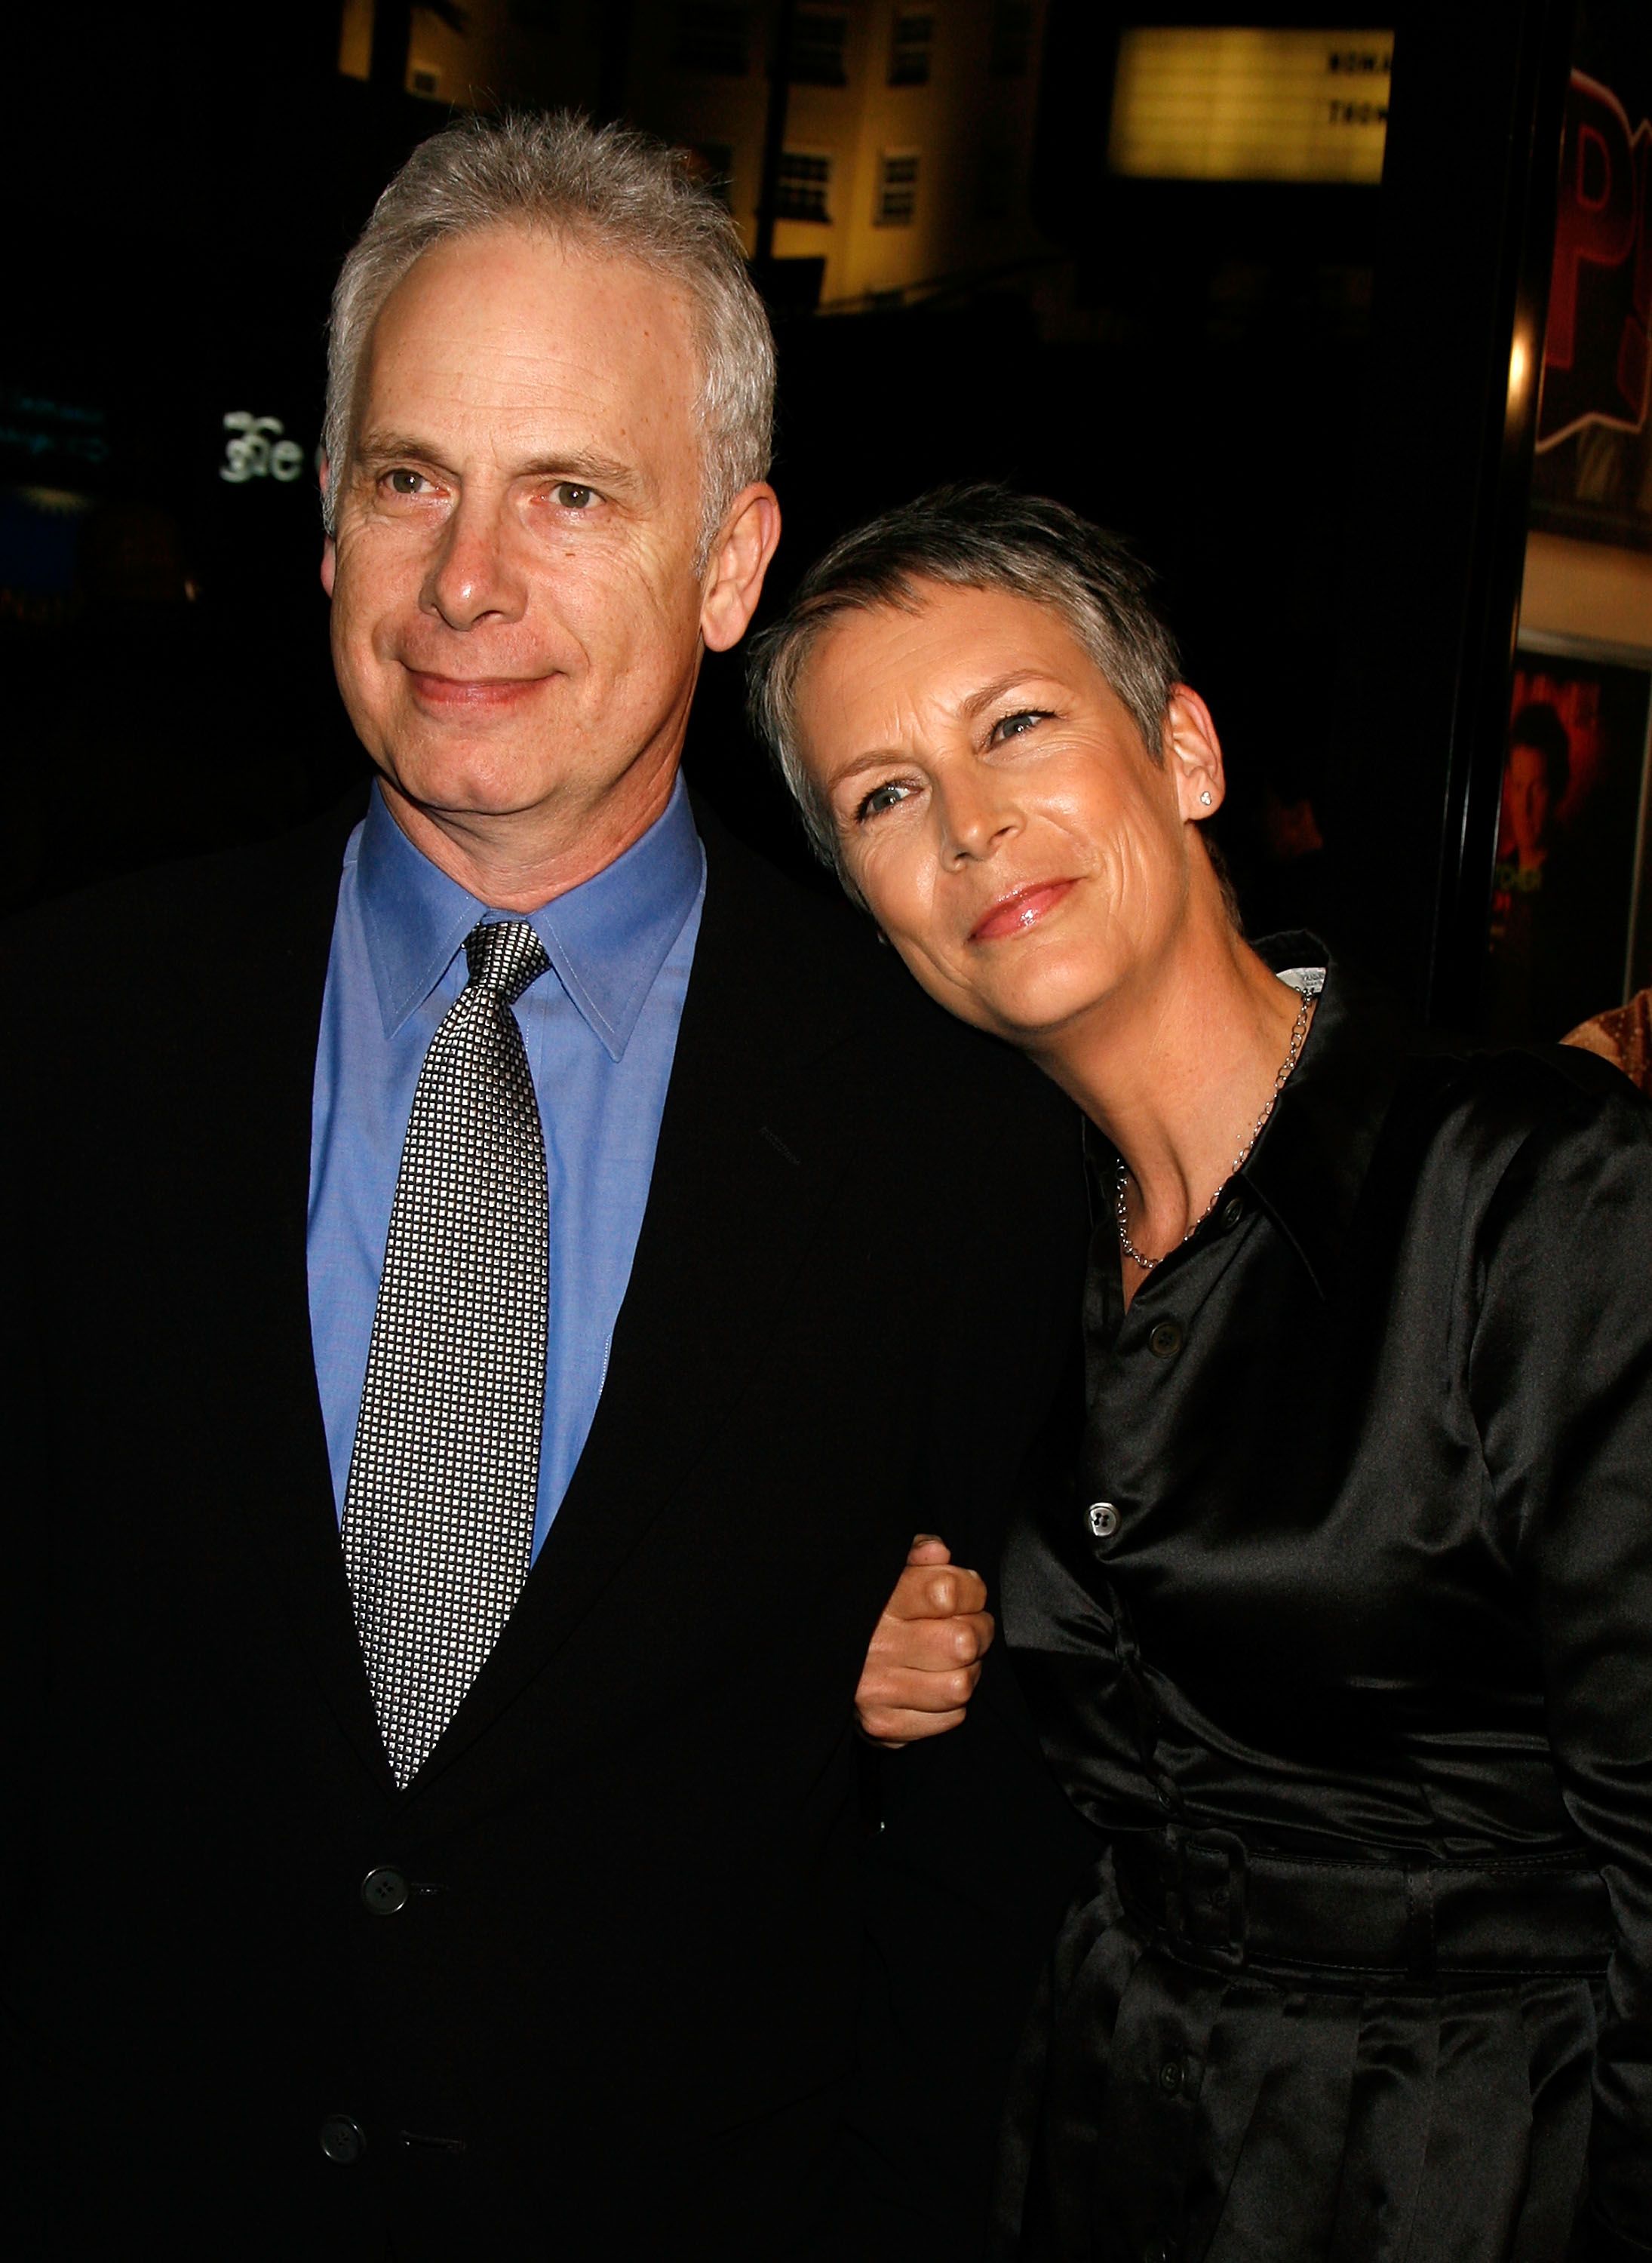 Jamie Lee Curtis with husband Christopher Guest at the Warner Bros. premiere of "Music and Lyrics" at the Grauman's Chinese Theatre in Hollywood, California | Photo: Kevin Winter/Getty Images